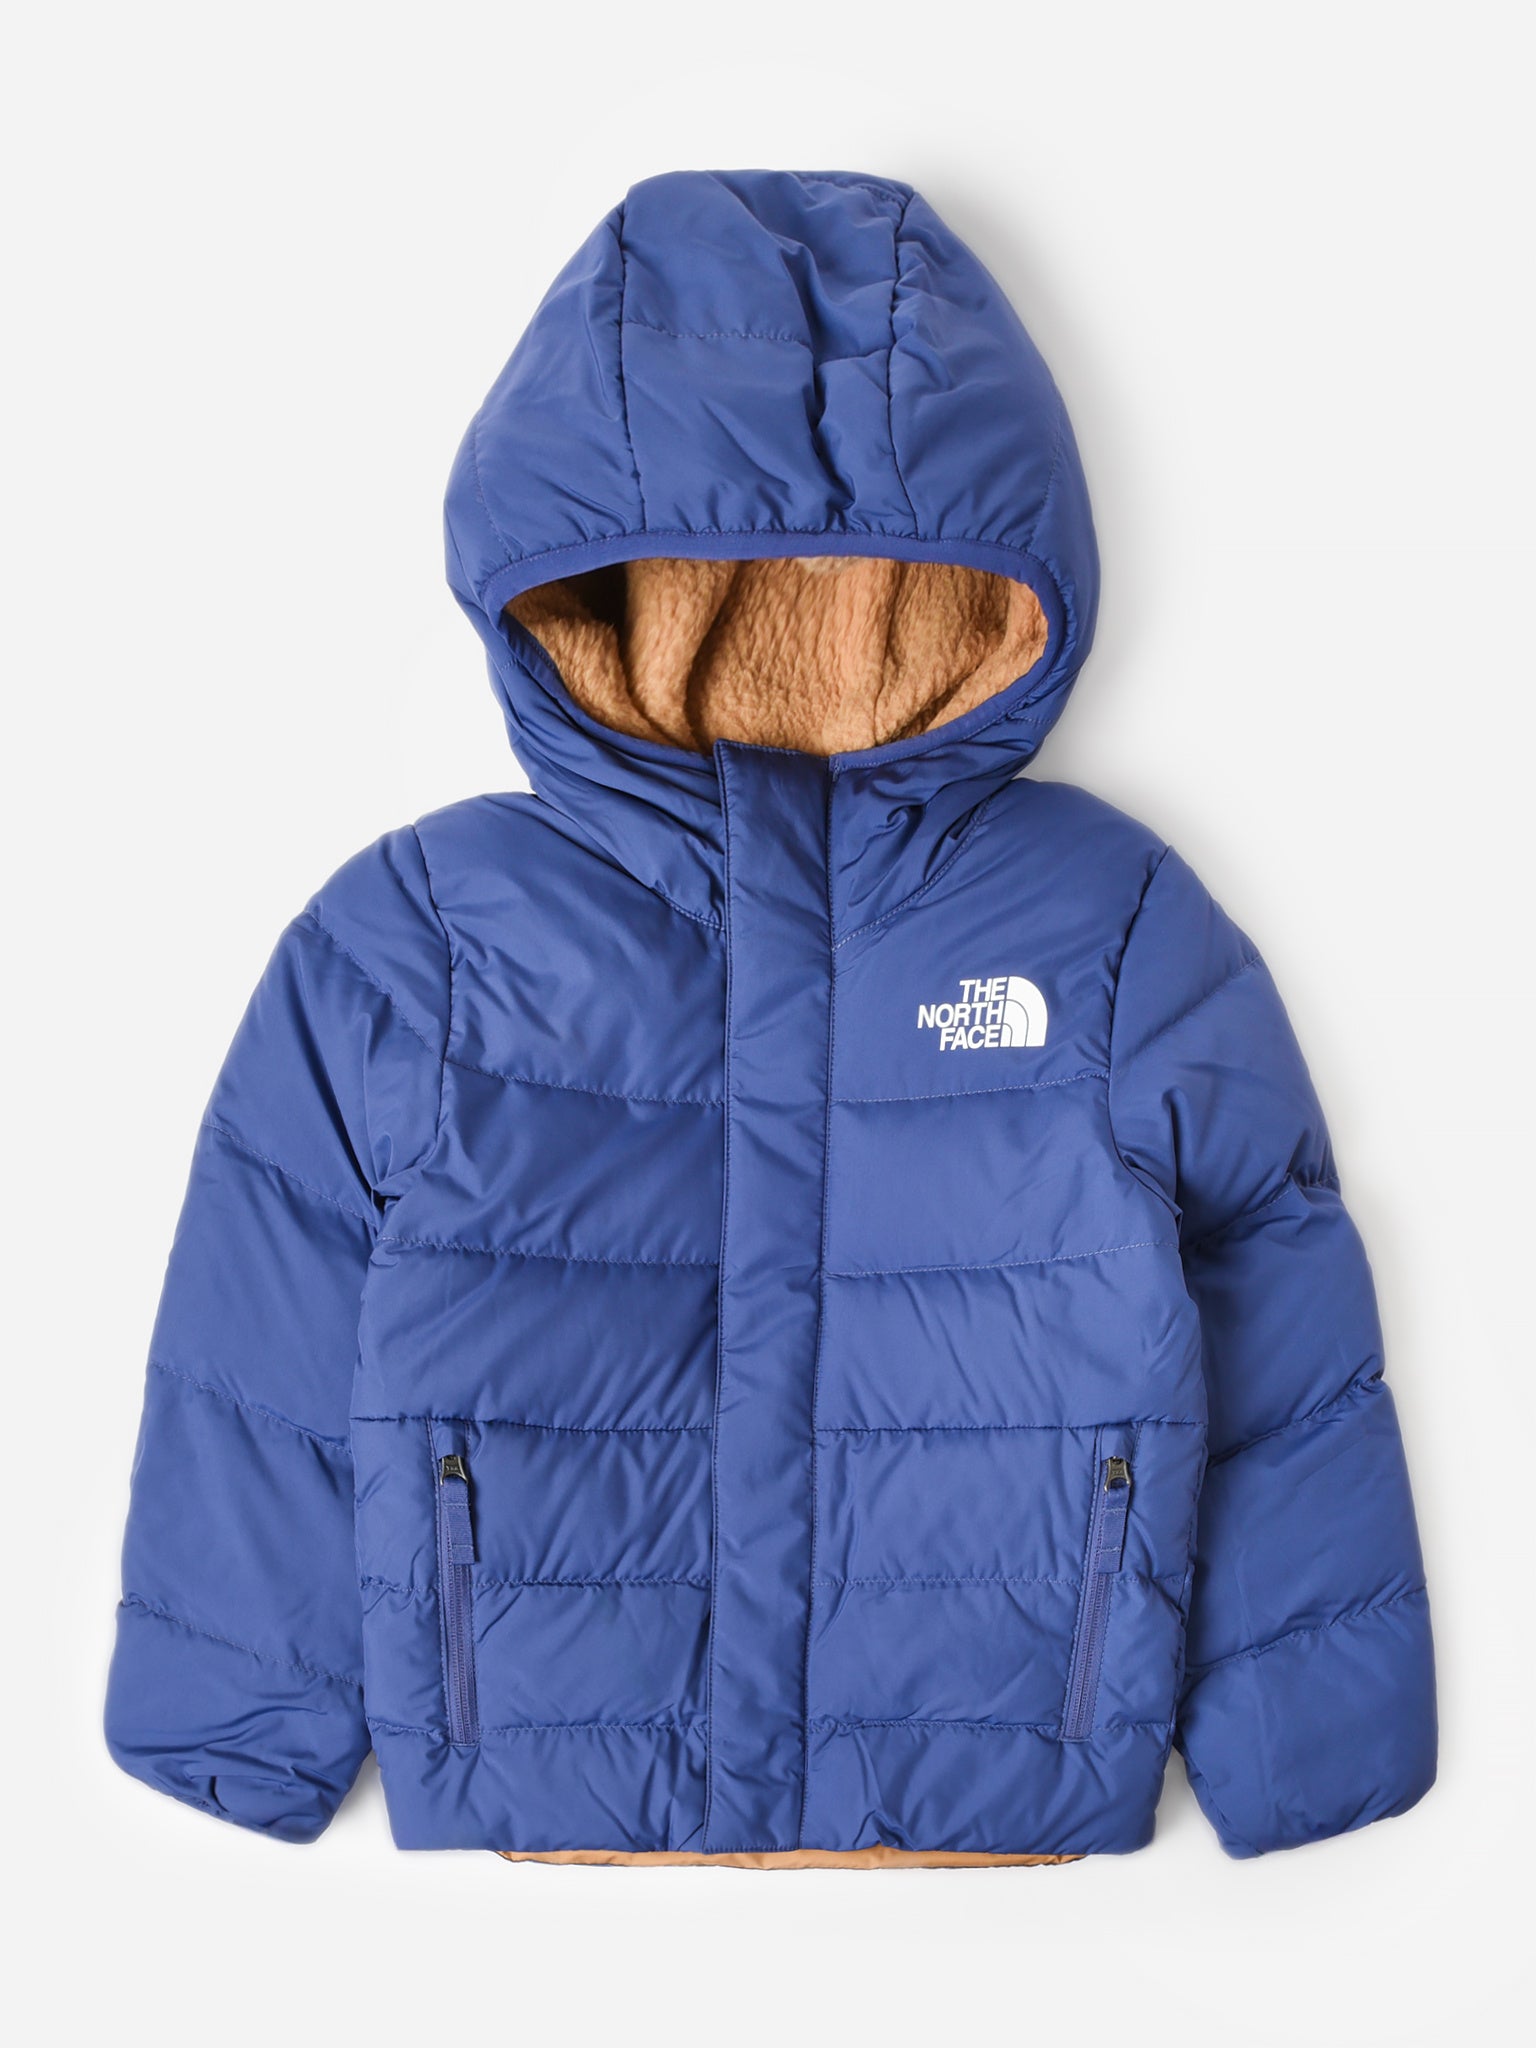 The North Face Boys North Down Fleece Lined Parka